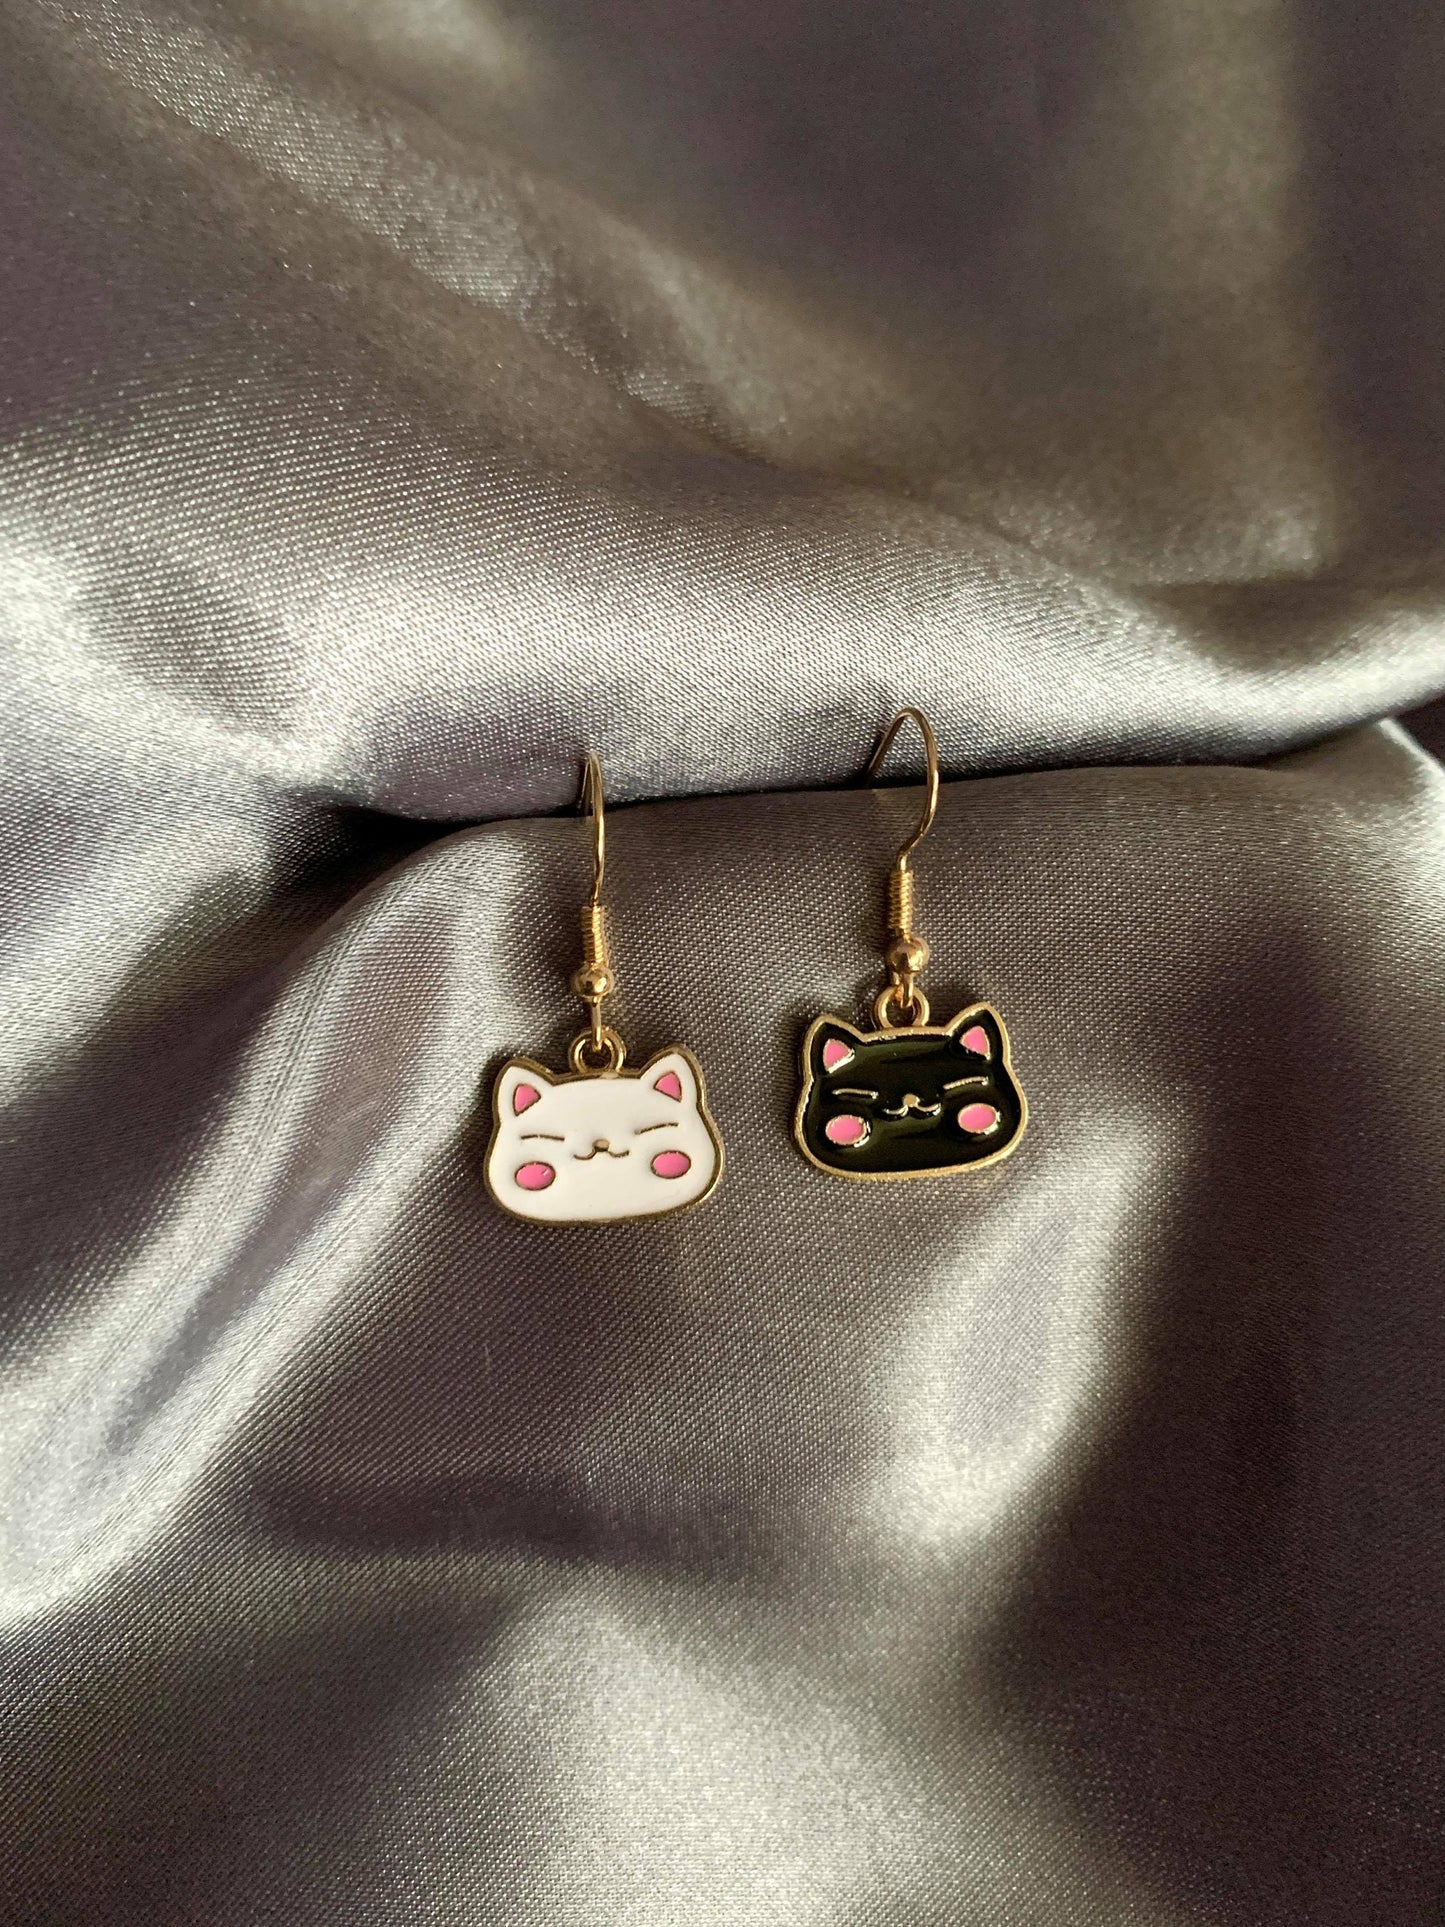 Unique Black and White Cat Earrings